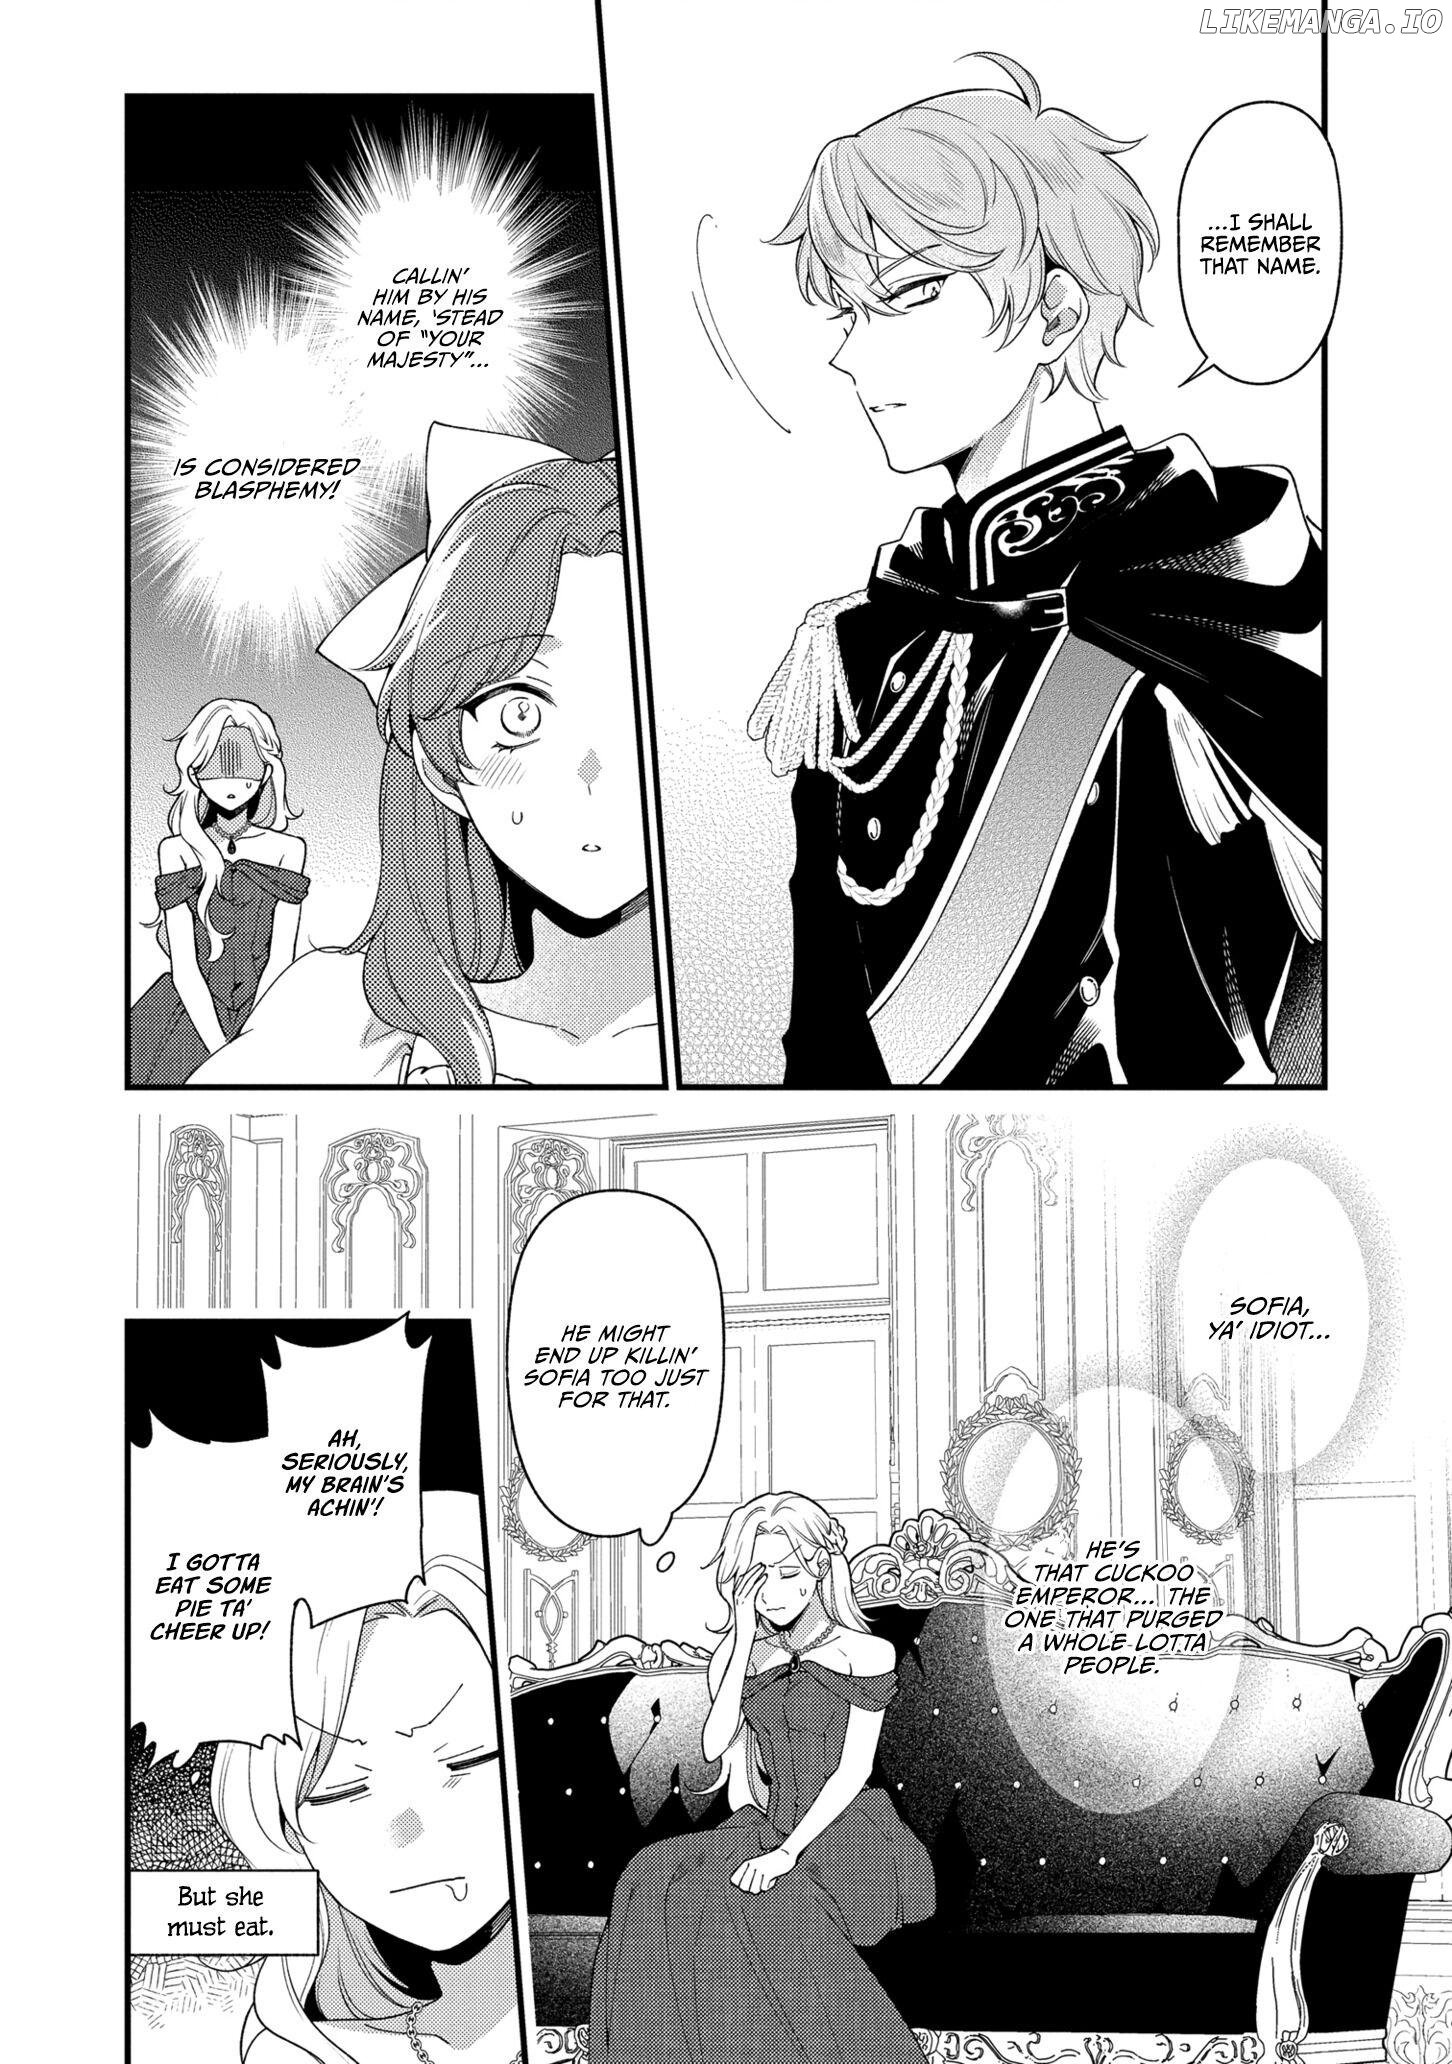 The Silent Daughter of a Duke and the Cold Emperor ~ The Child I Found in My Past Life Became the Emperor ~ Chapter 6 - page 14